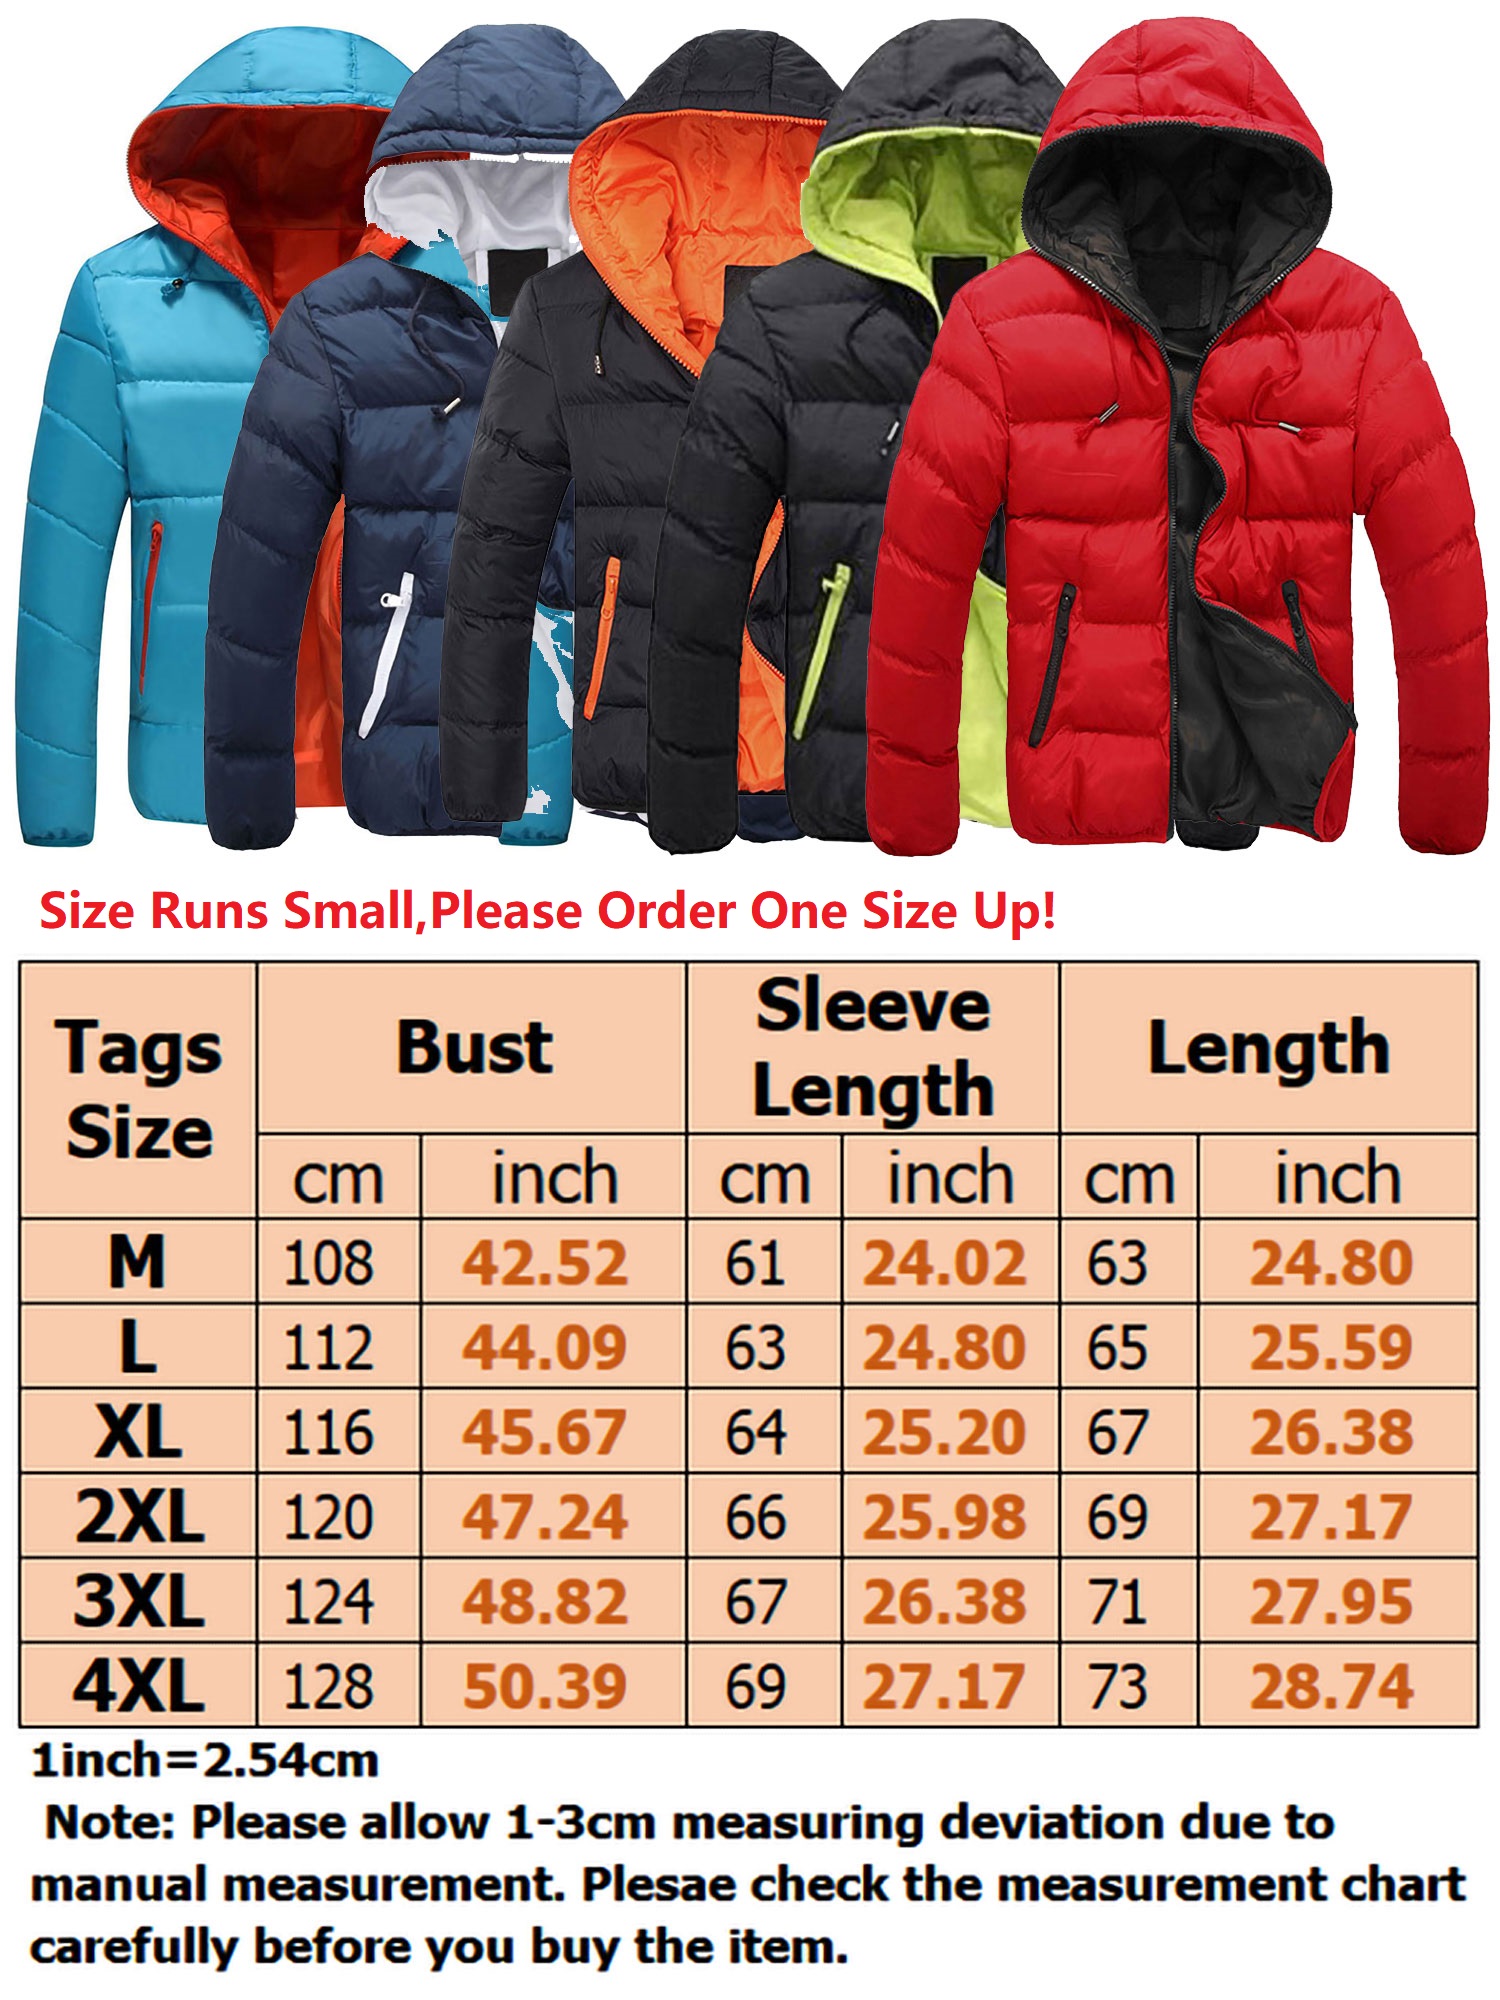 Winter Warm Windproof Ski Down Coat for Men Leisure Relaxed Fit Climbing Parka Jacket Compressible Hooded Puffer Snowboarding Outerwear - image 2 of 2